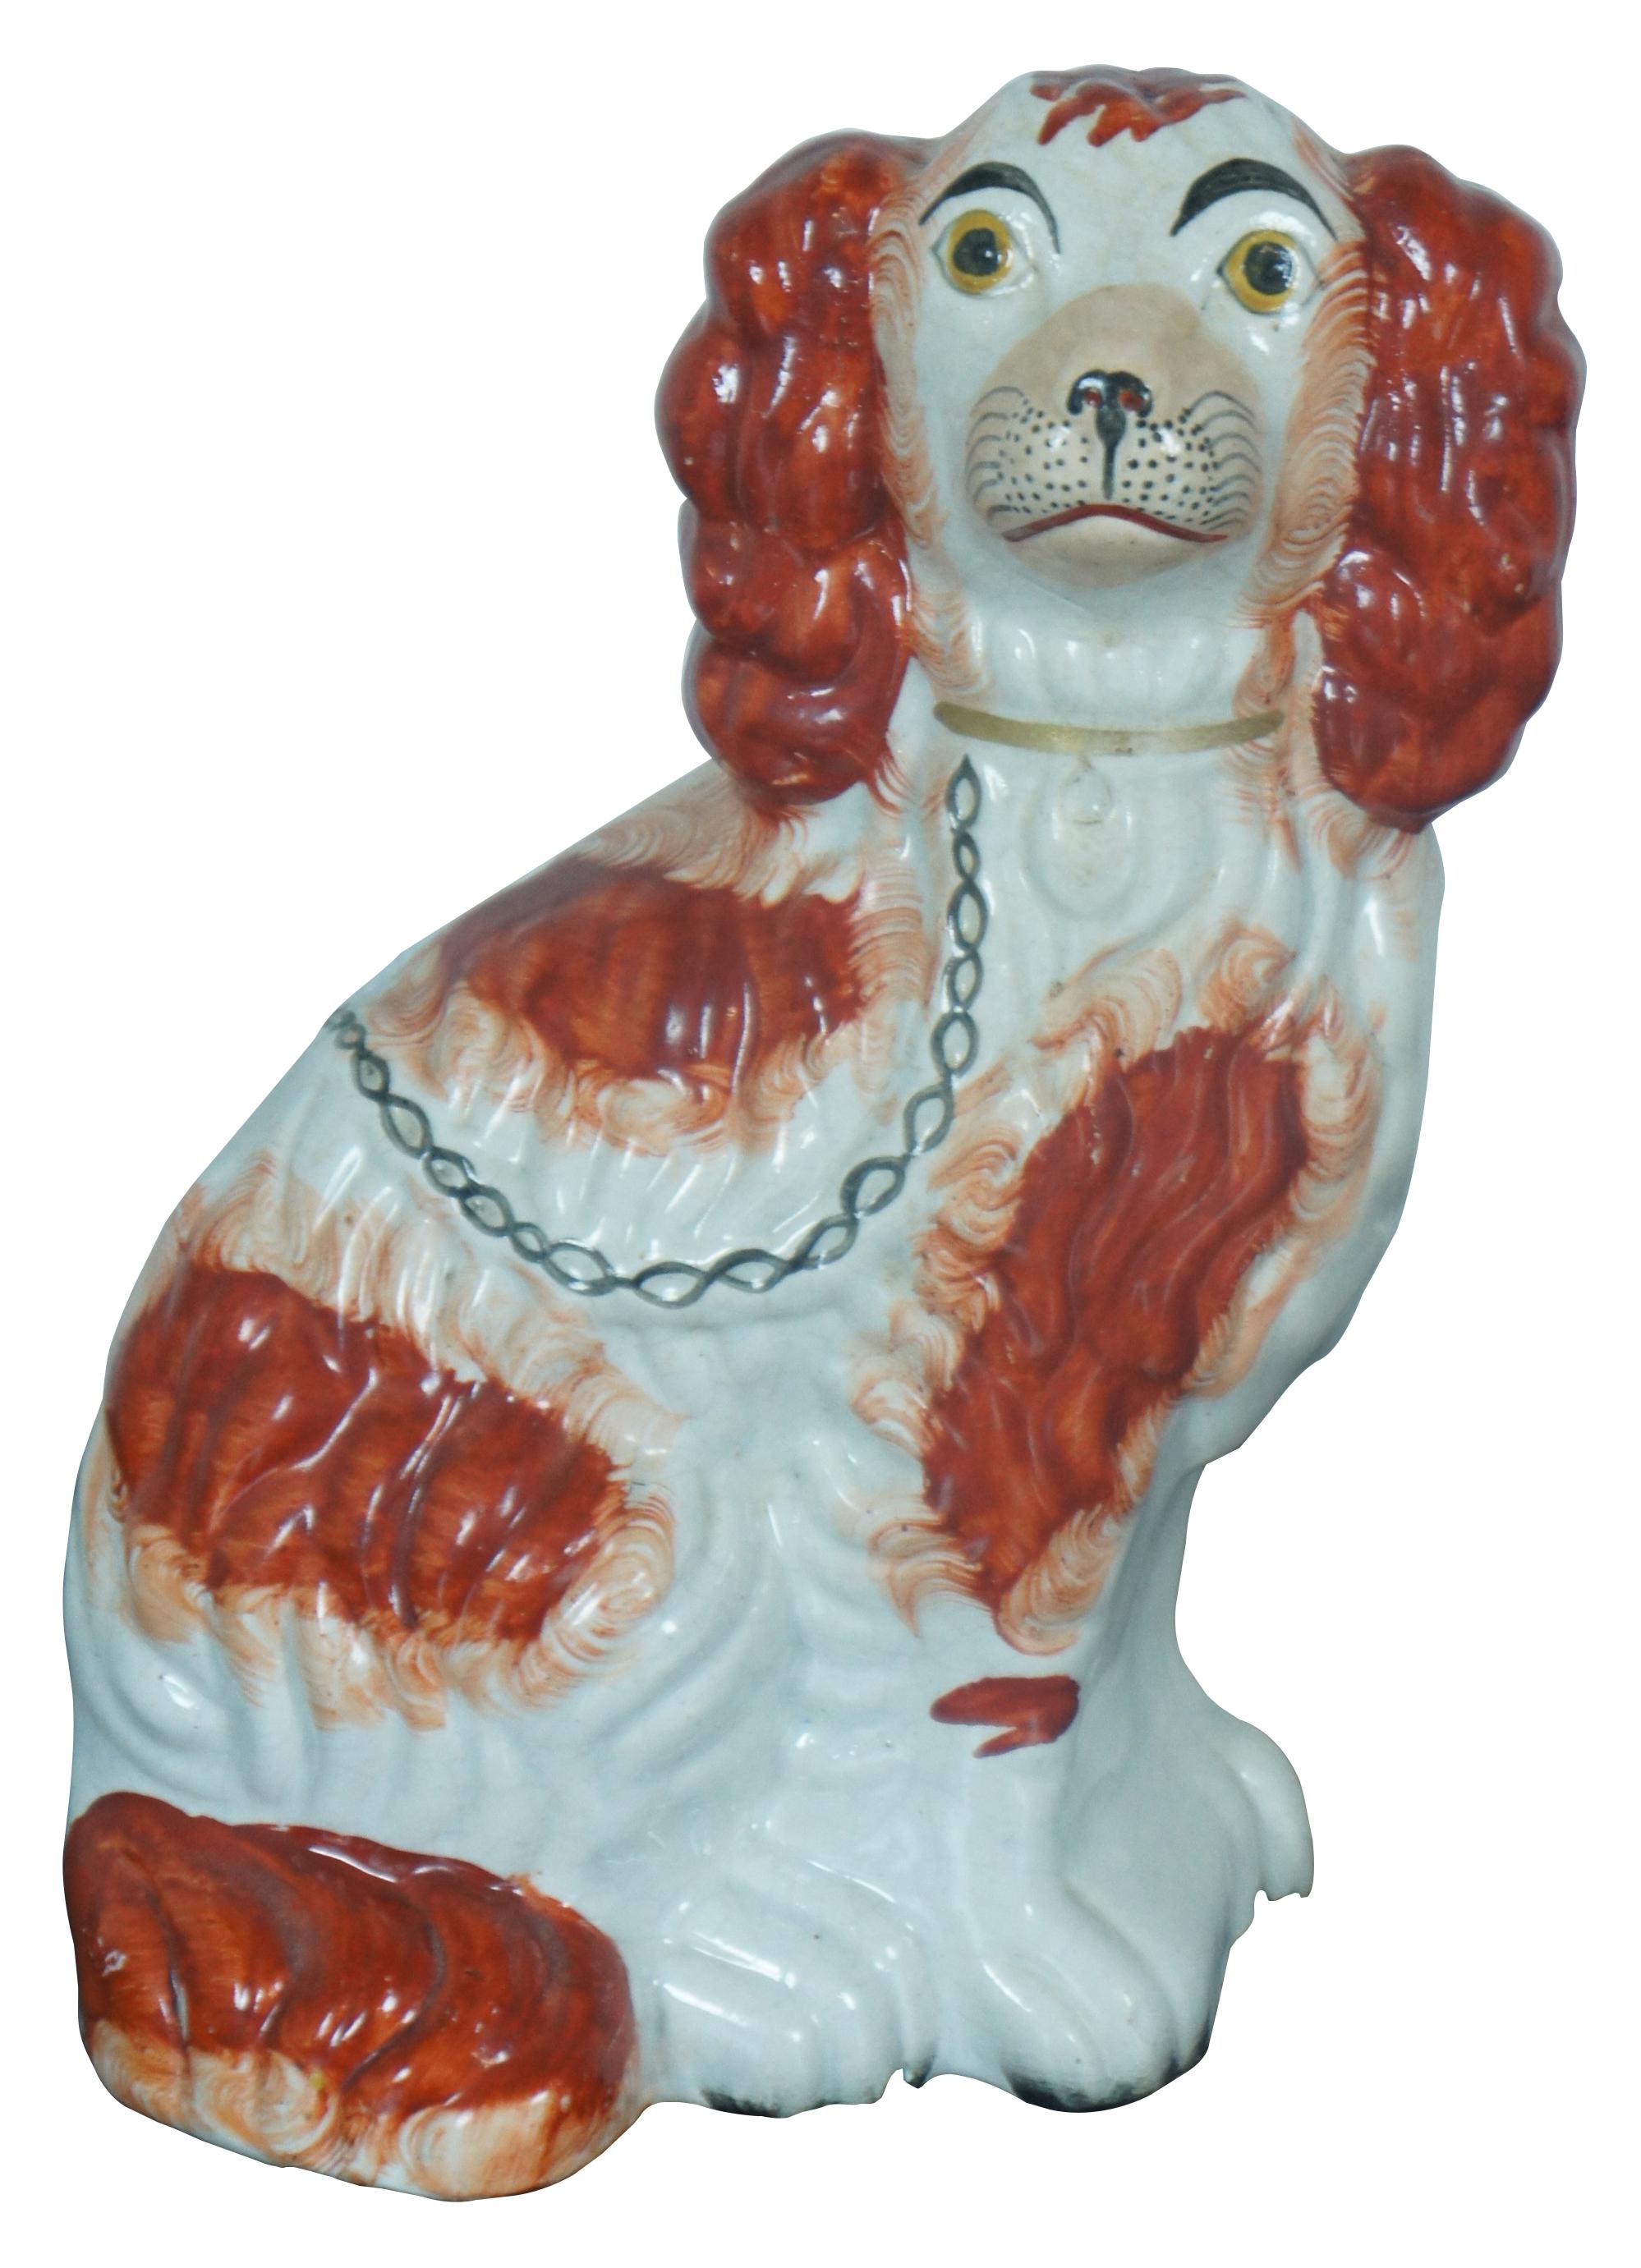 Pair of antique Staffordshire porcelain red and white King Charles Spaniel sculptures with gilded collars and chains. Circa last quarter 19th century, incised with a #2 along the base.  Measure: 10